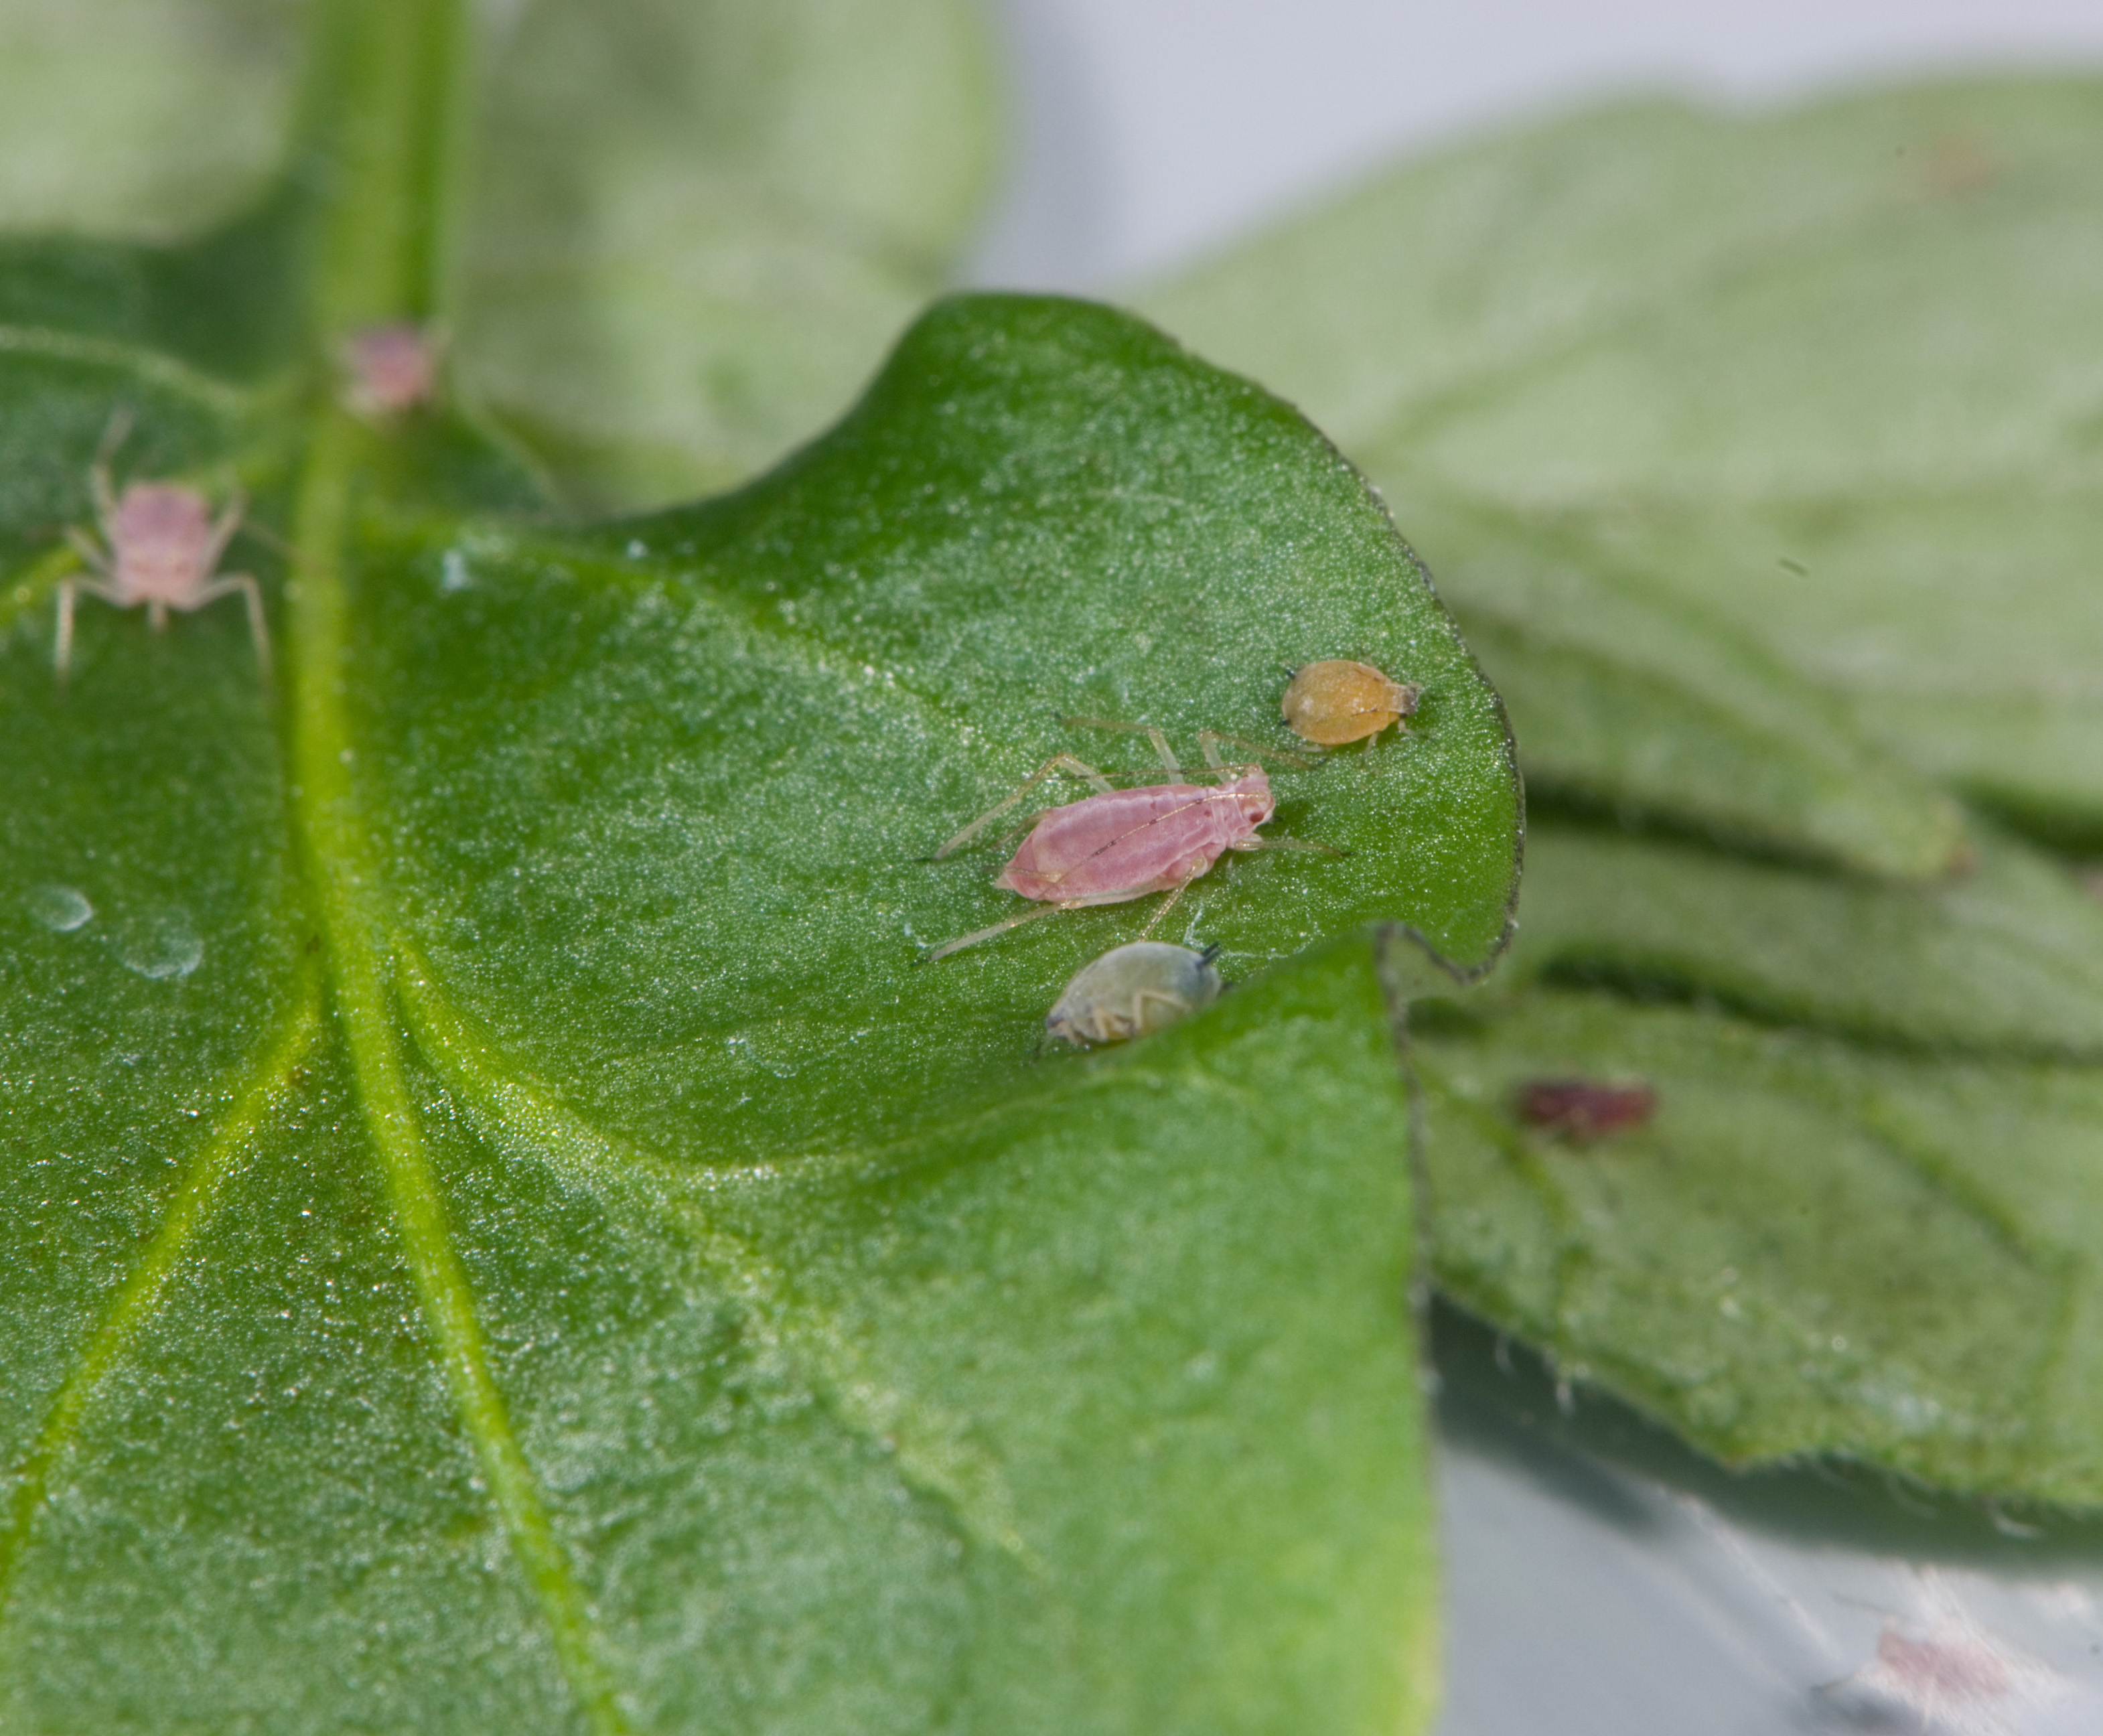 Comparison of size and shape of potato aphid (center) and melon aphids.